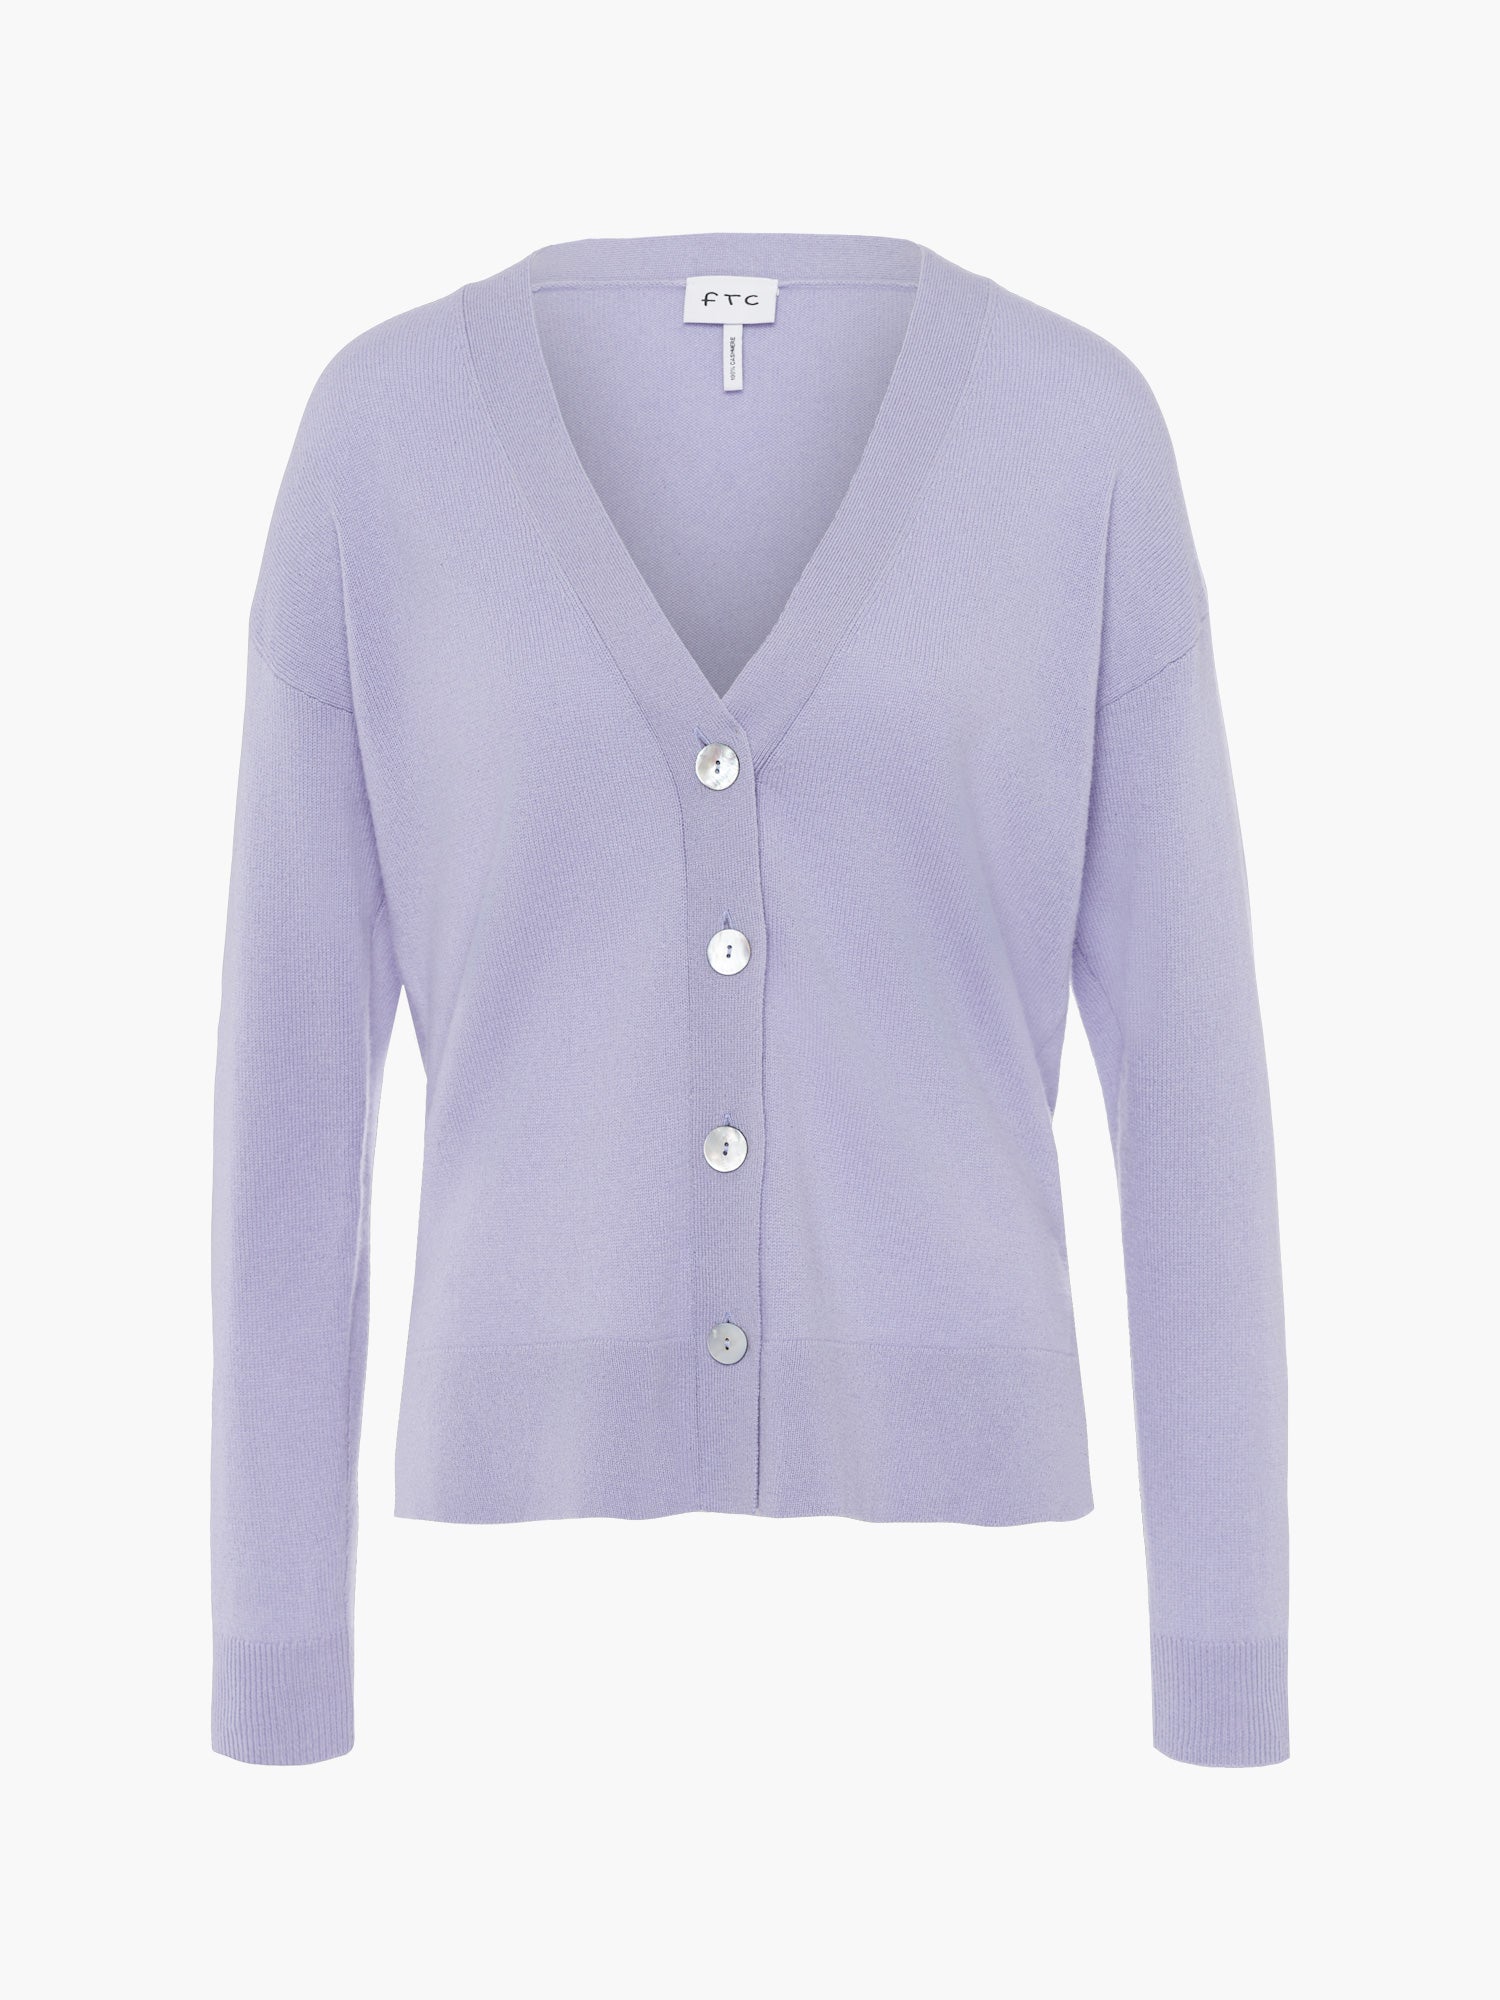 FTC-Cashmere-OUTLET-SALE-Cardigan-VN-Strick-ARCHIVE-COLLECTION_29c3bf47-f608-4394-892c-800953ceaf76.jpg